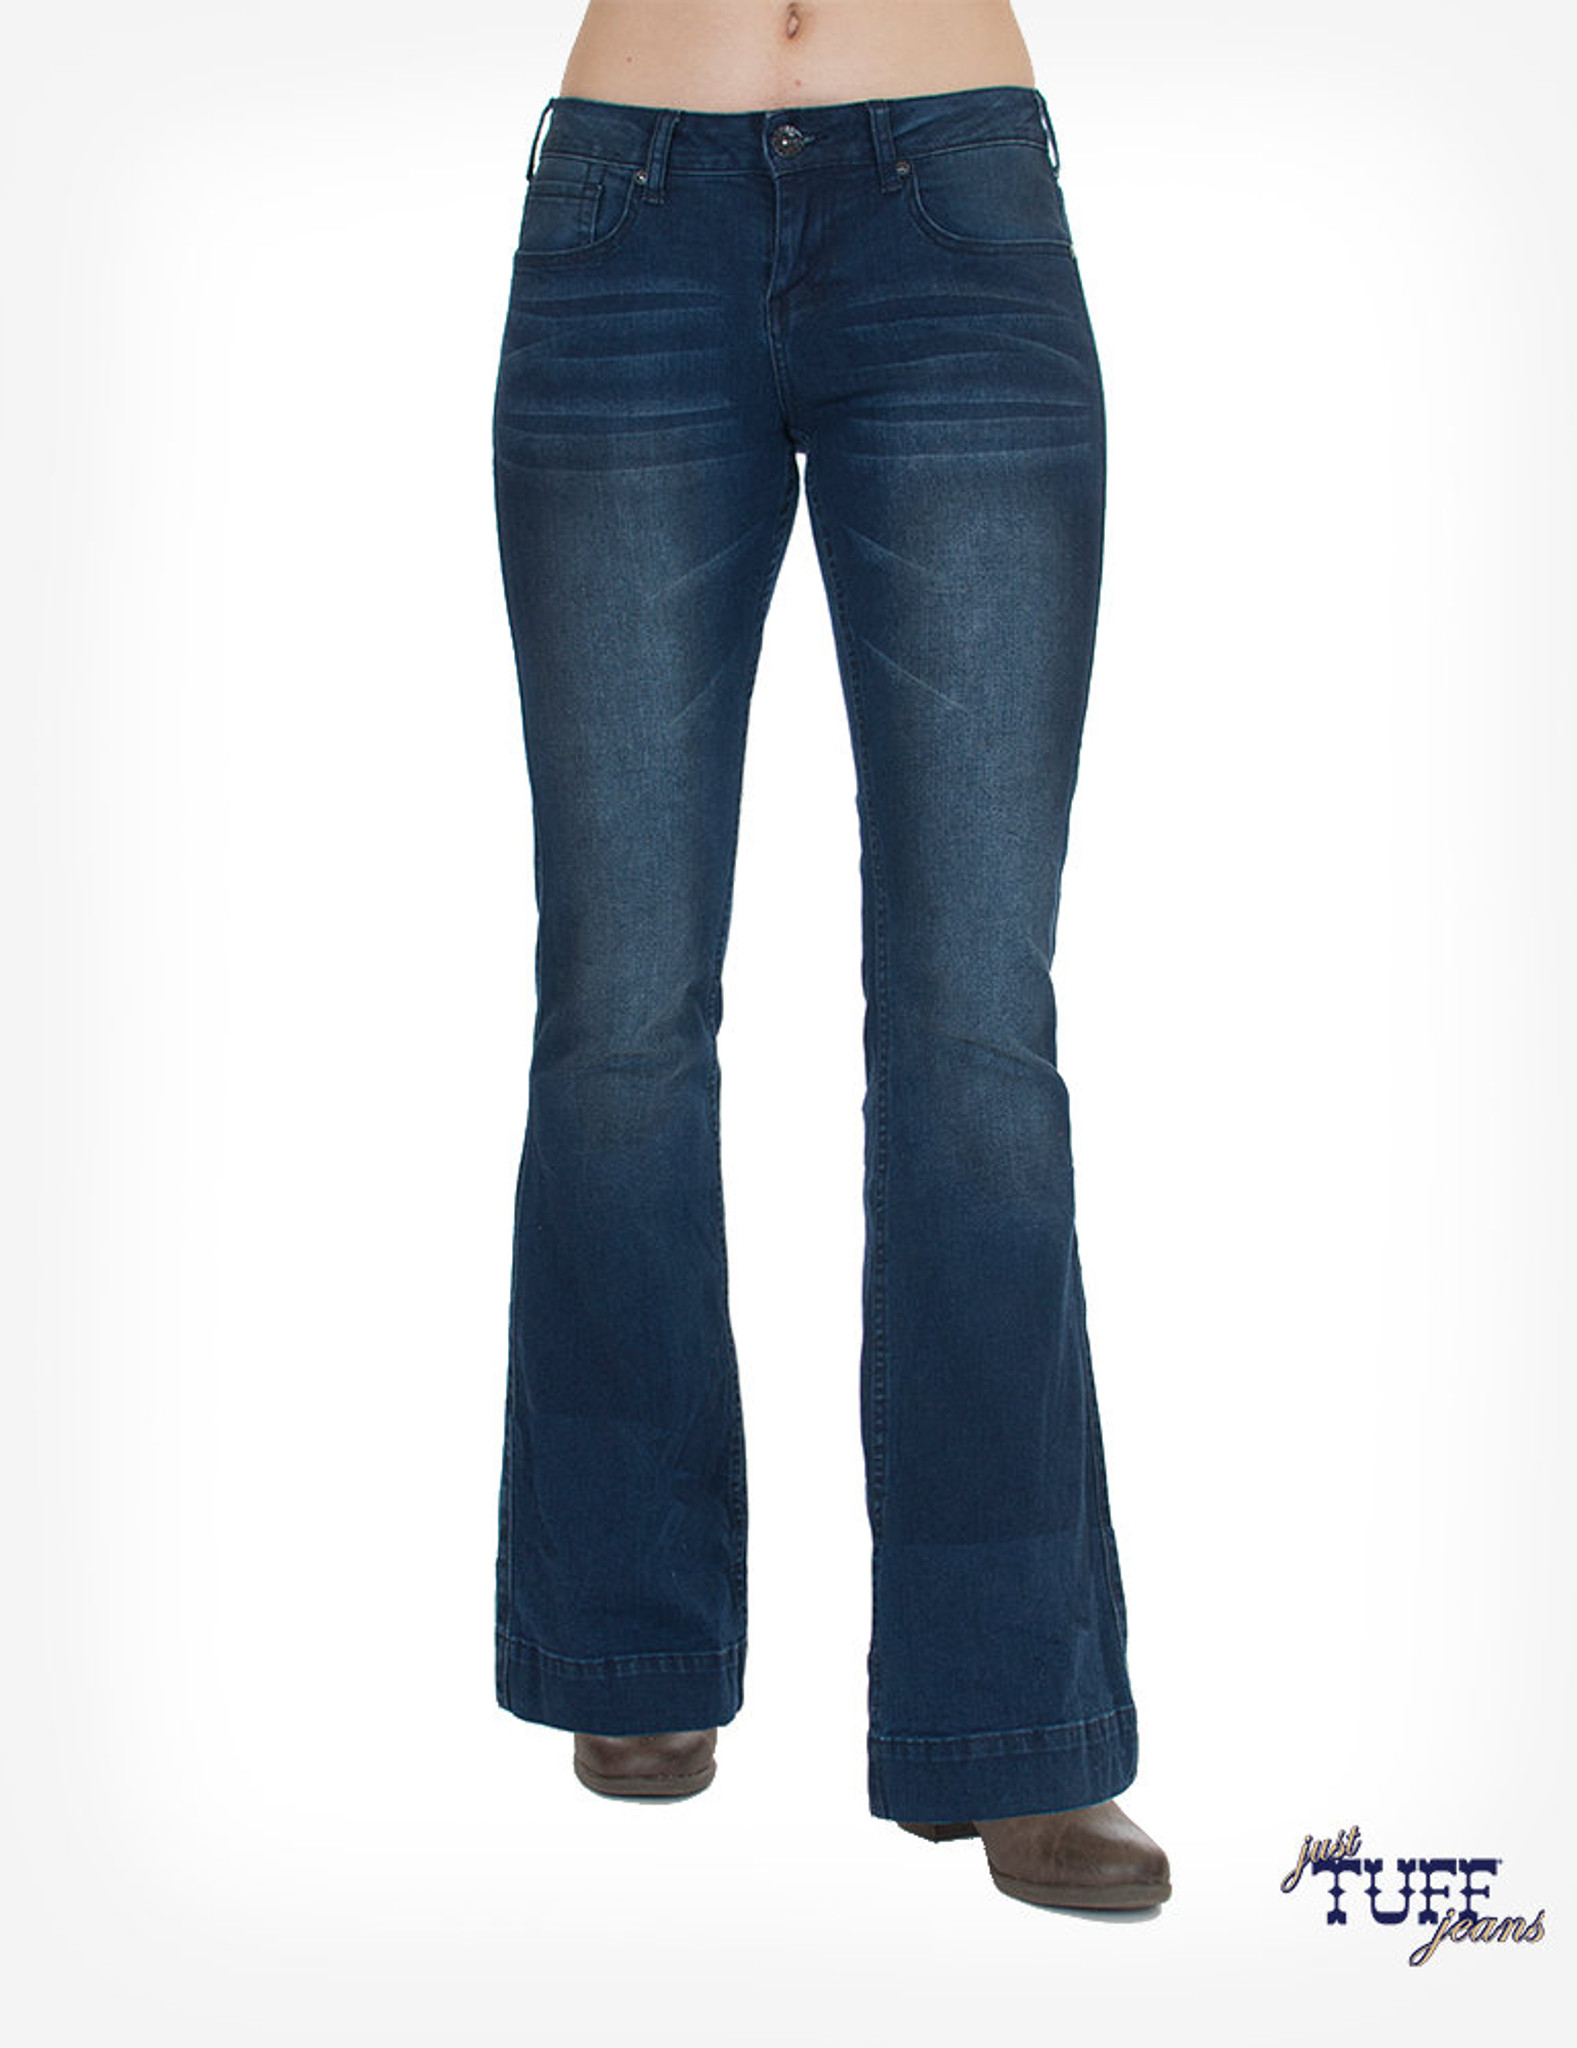 Womens Cowgirl Tuff Jean Just Tuff Trouser Chick Elms Grand Entry Western Store And Rodeo Shop